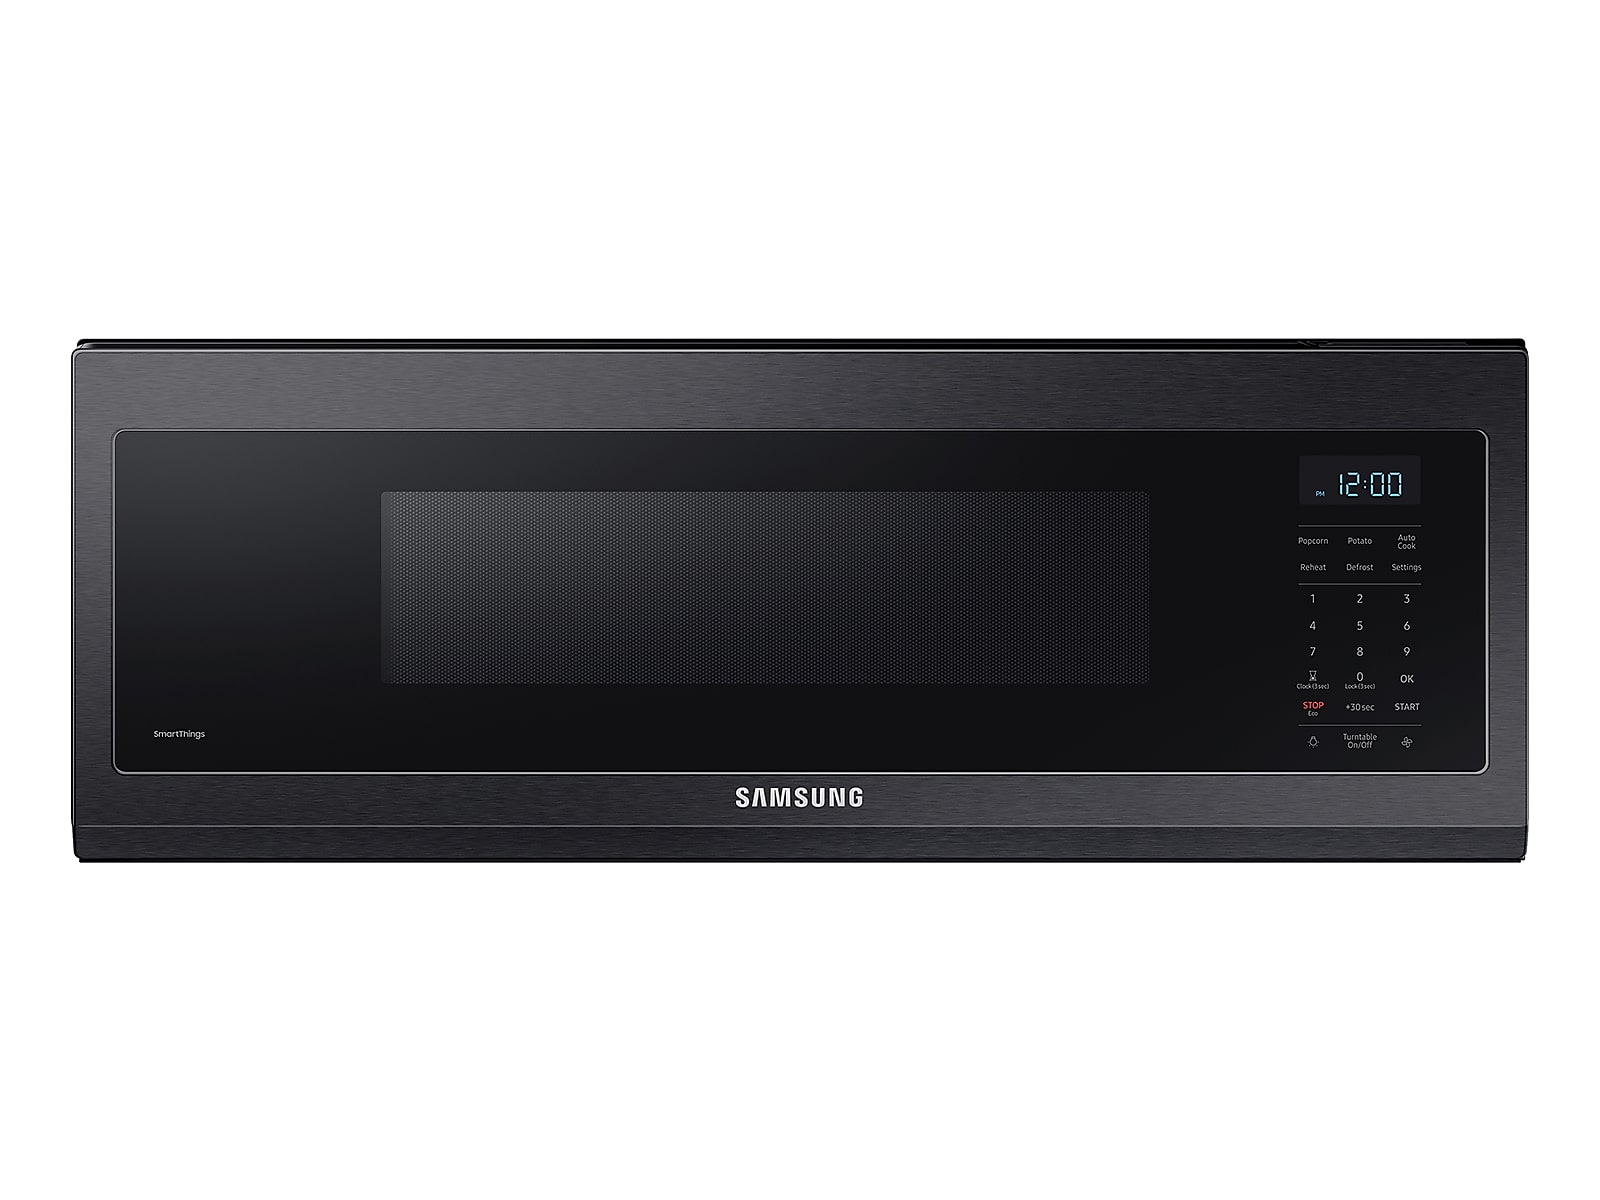 Samsung 1.1 cu. ft. Smart SLIM Over-the-Range Microwave with 400 CFM Hood Ventilation, Wi-Fi & Voice Control in Black Stainless Steel photo